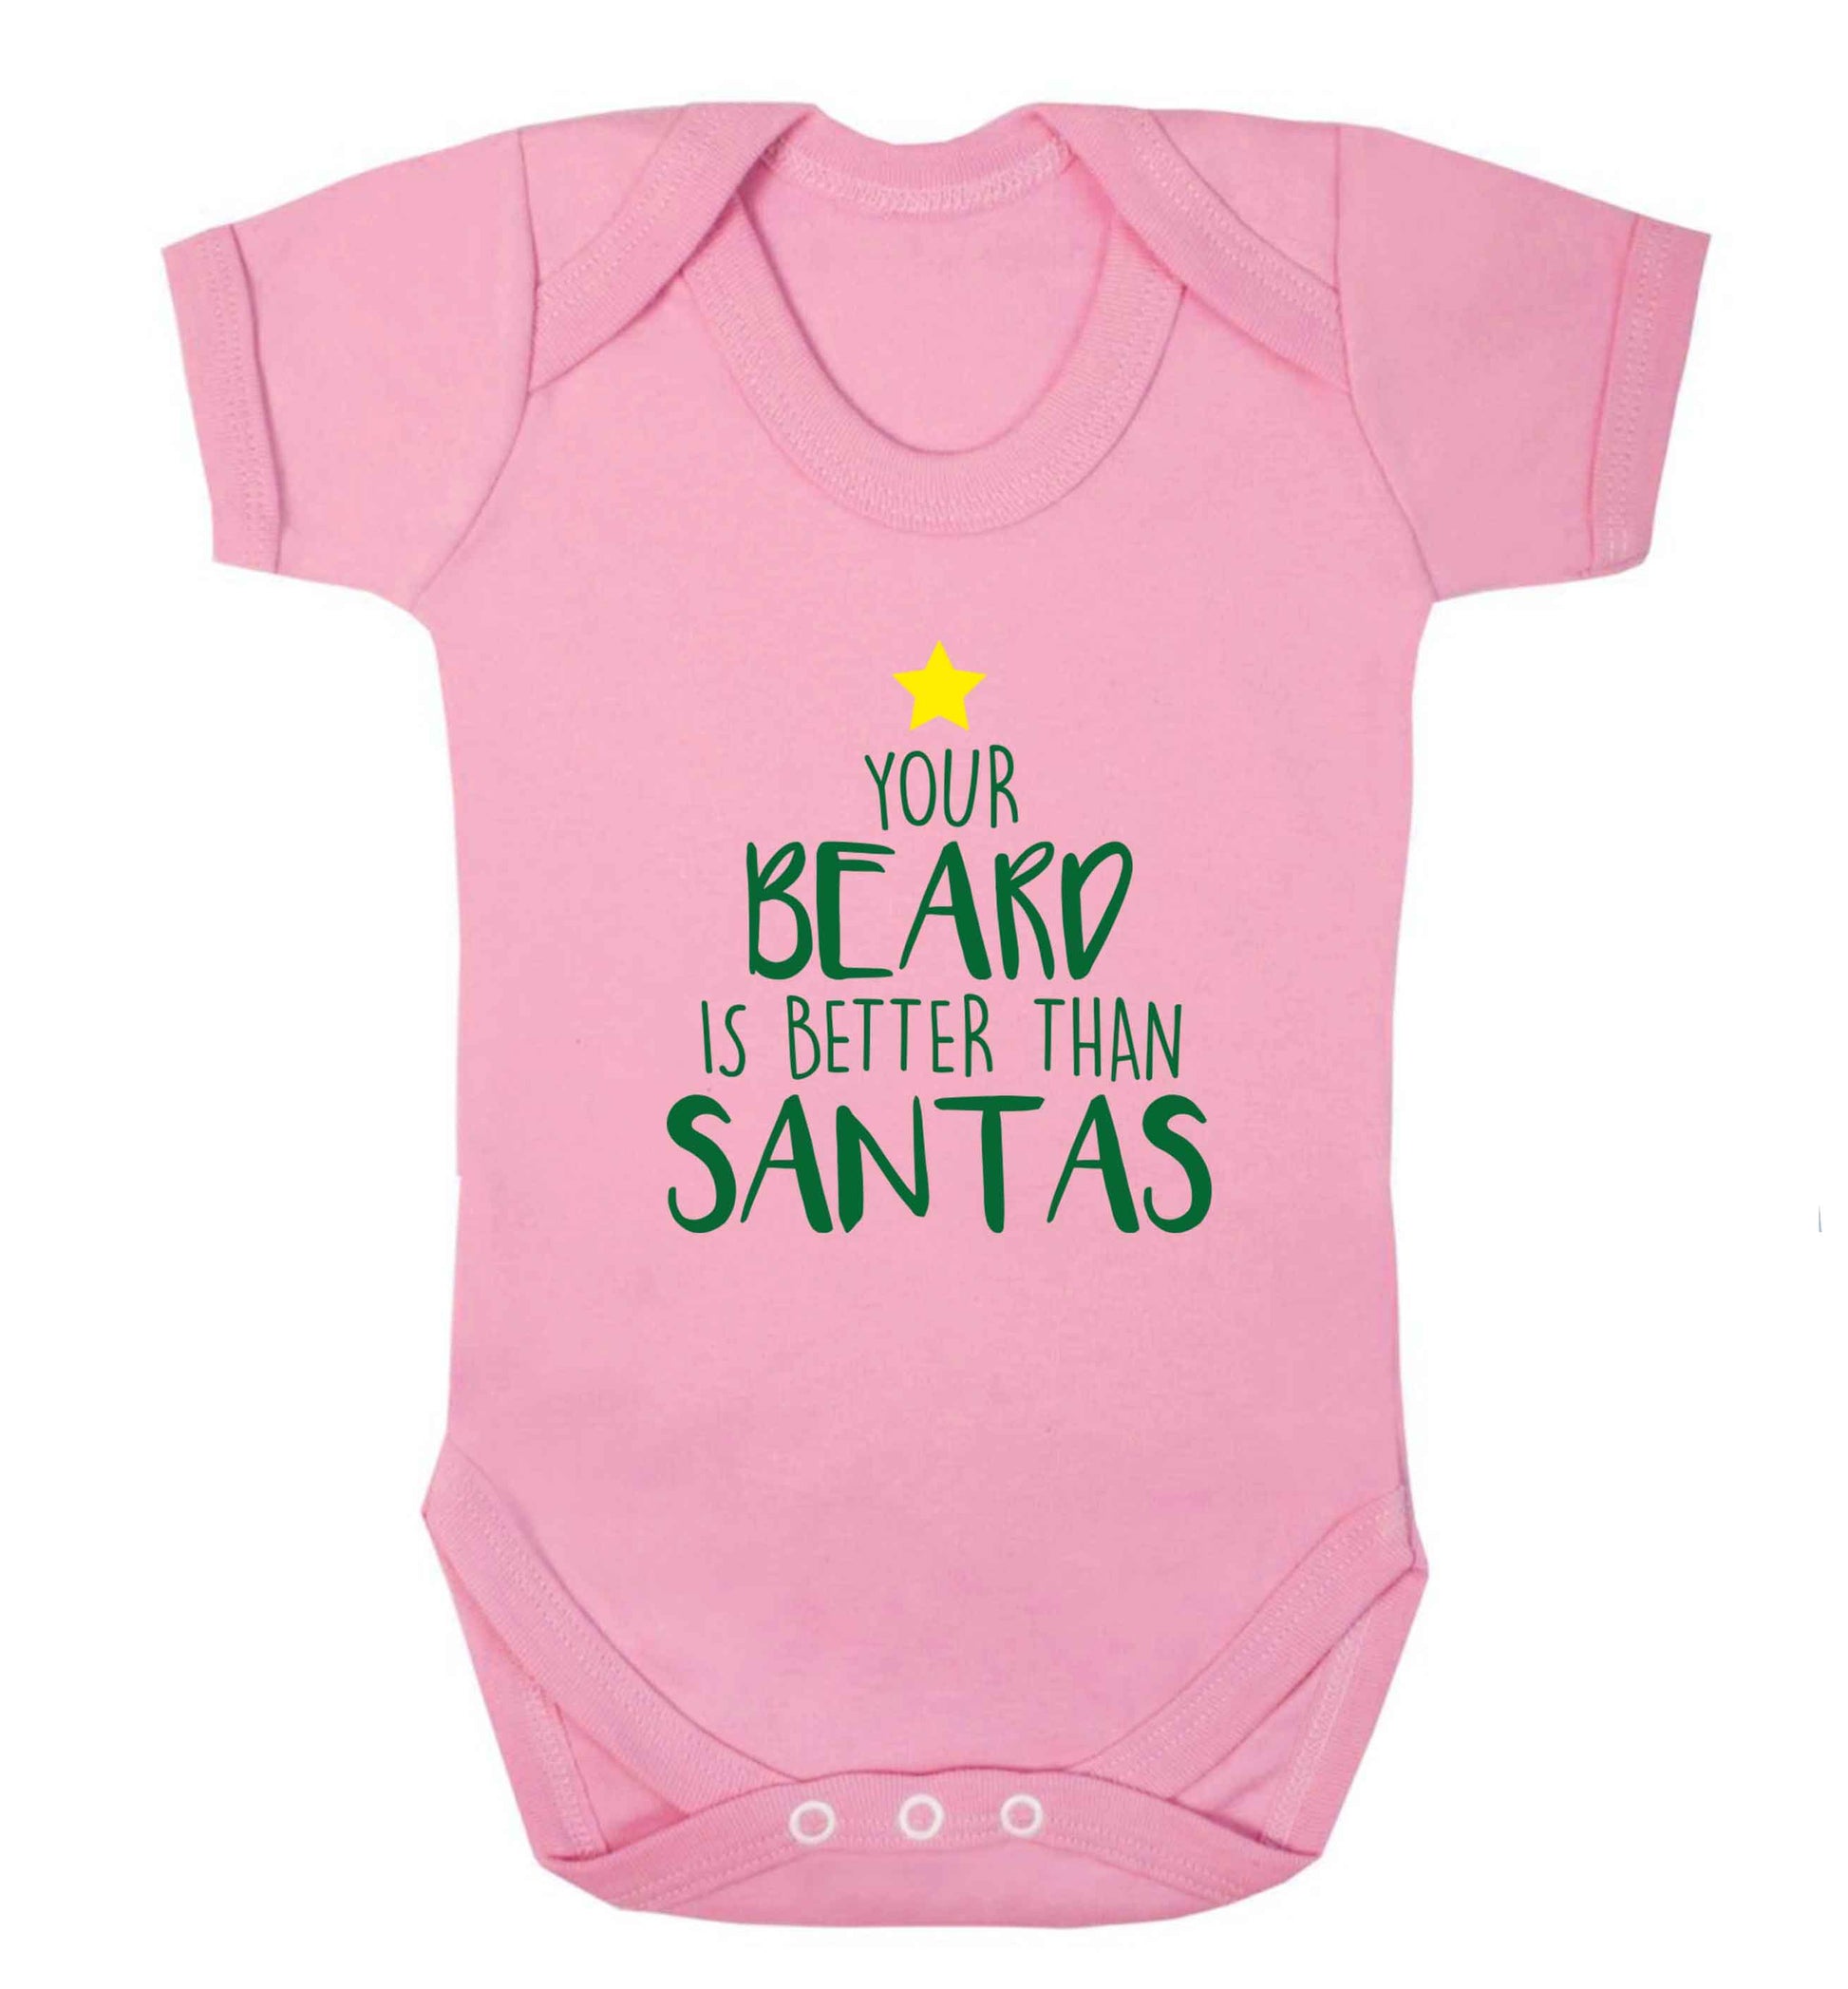 Your Beard Better than Santas baby vest pale pink 18-24 months